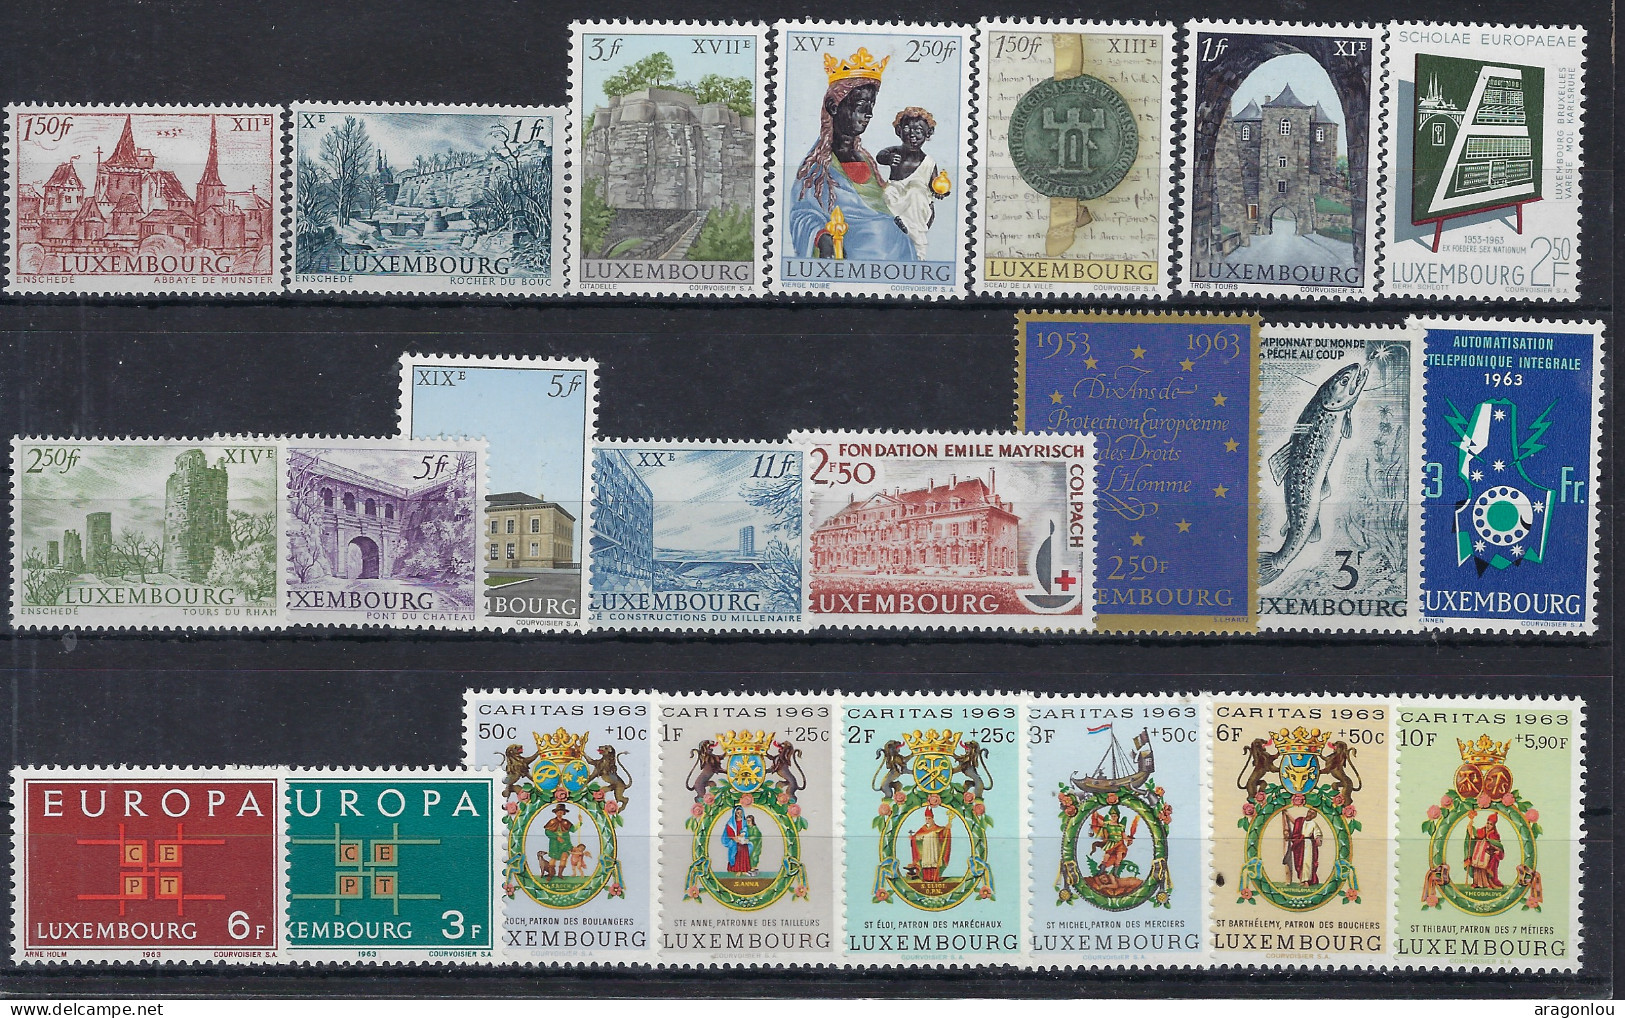 Luxembourg - Luxemburg - Timbres -  1963    Année Complète   8 Séries   MNH** - Volledige Jaargang